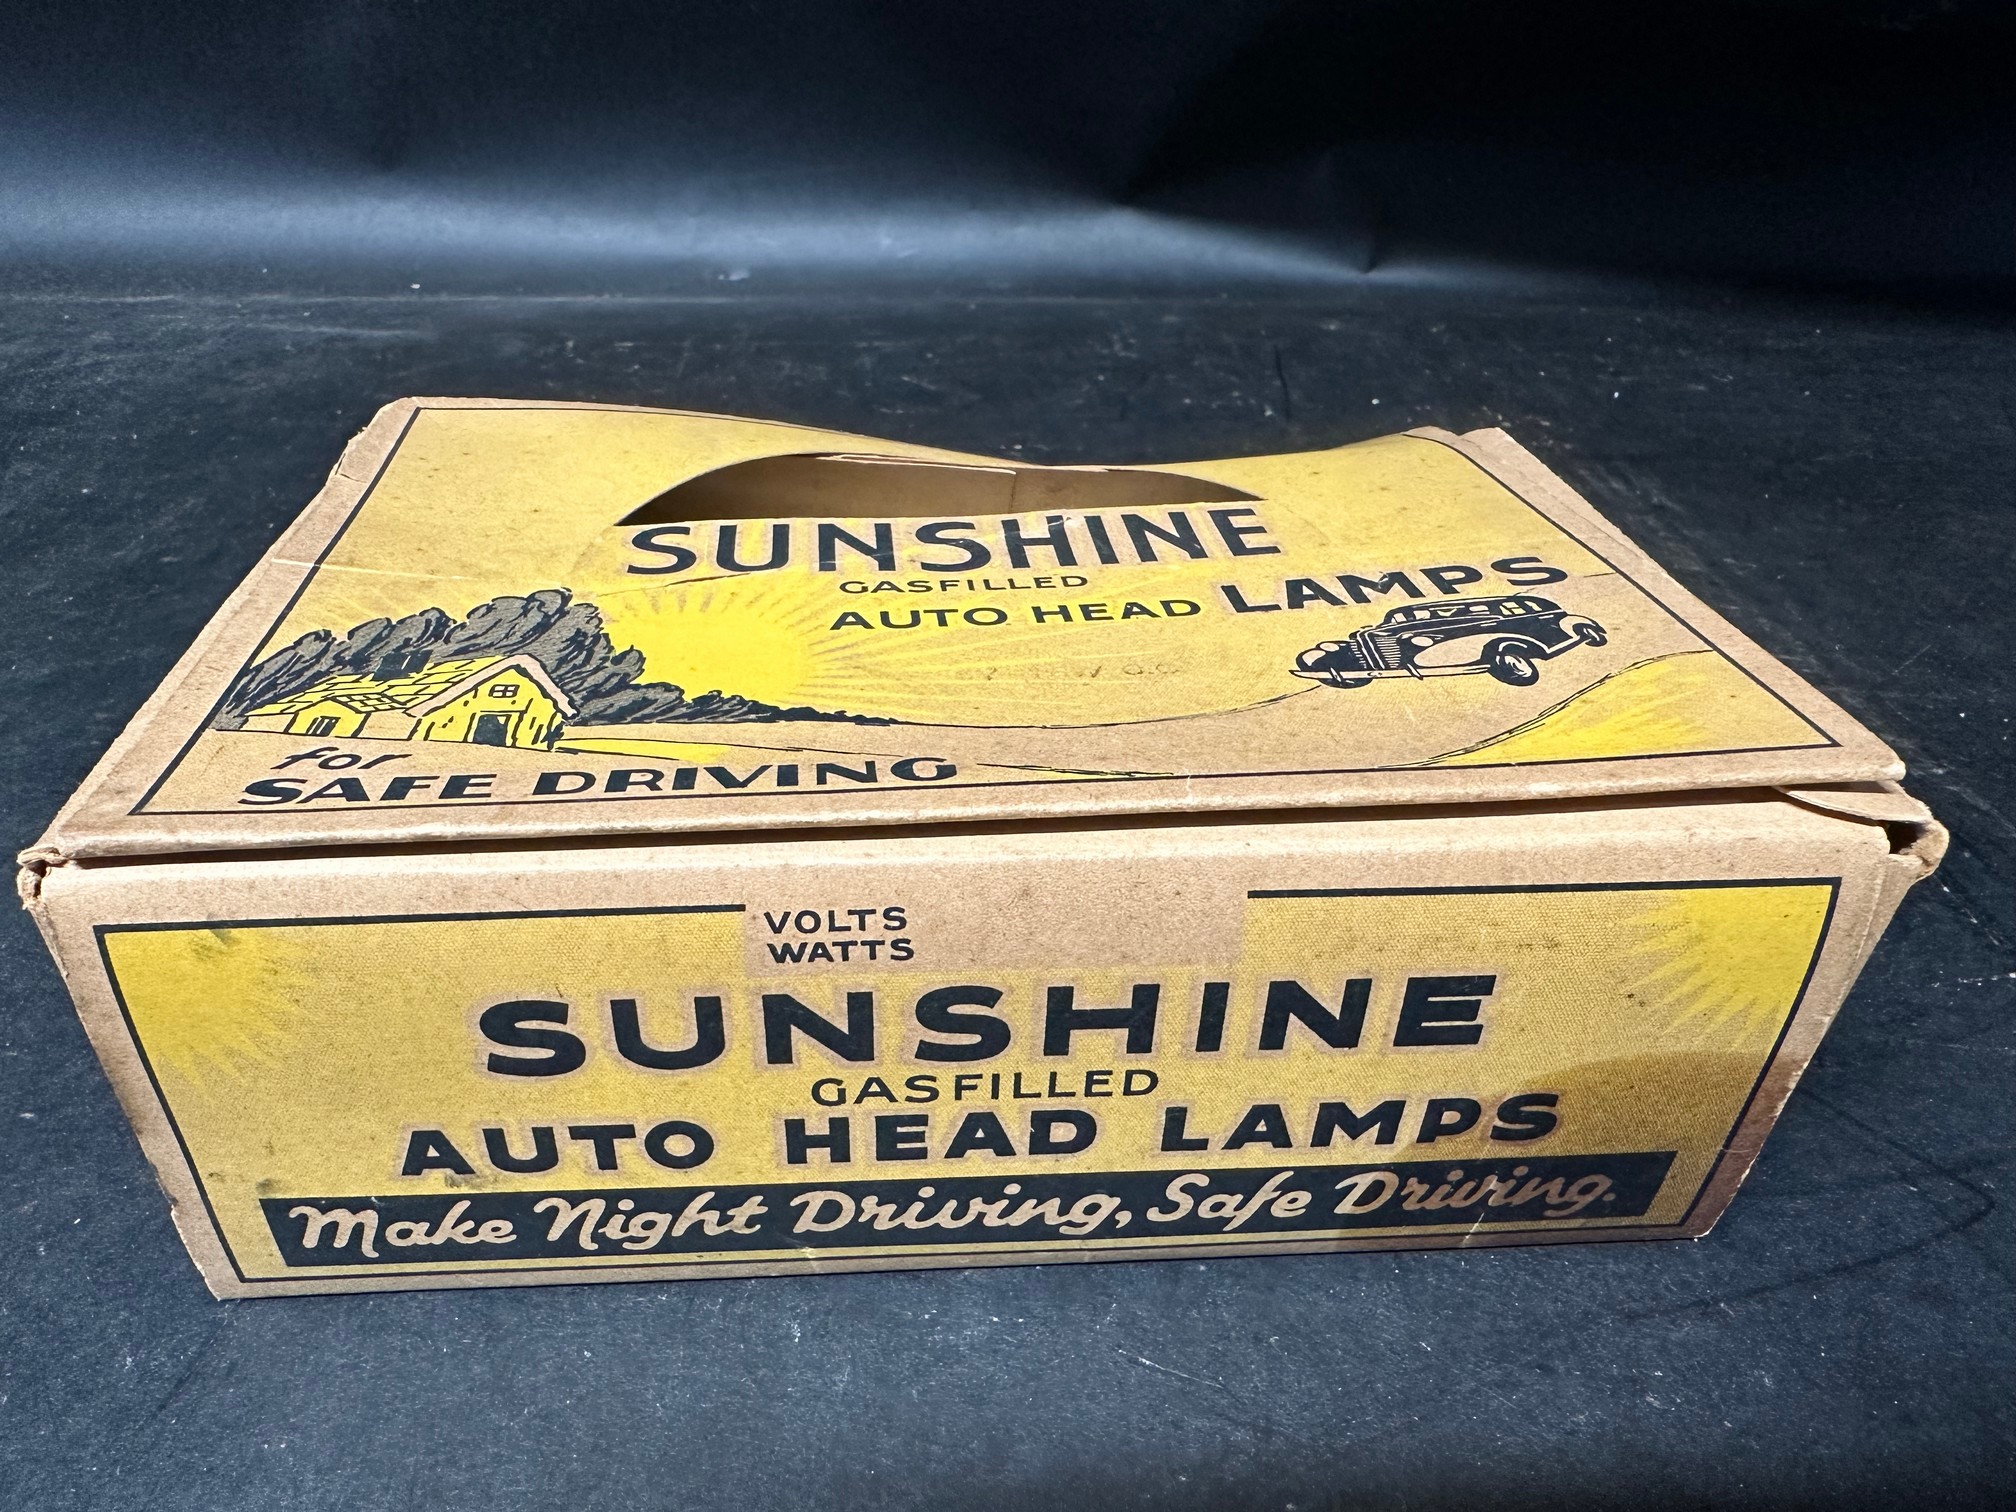 A box of Sunshine gas-filled Auto Head Lamps, new old stock and an Esso Blue invoice pad. - Image 4 of 5